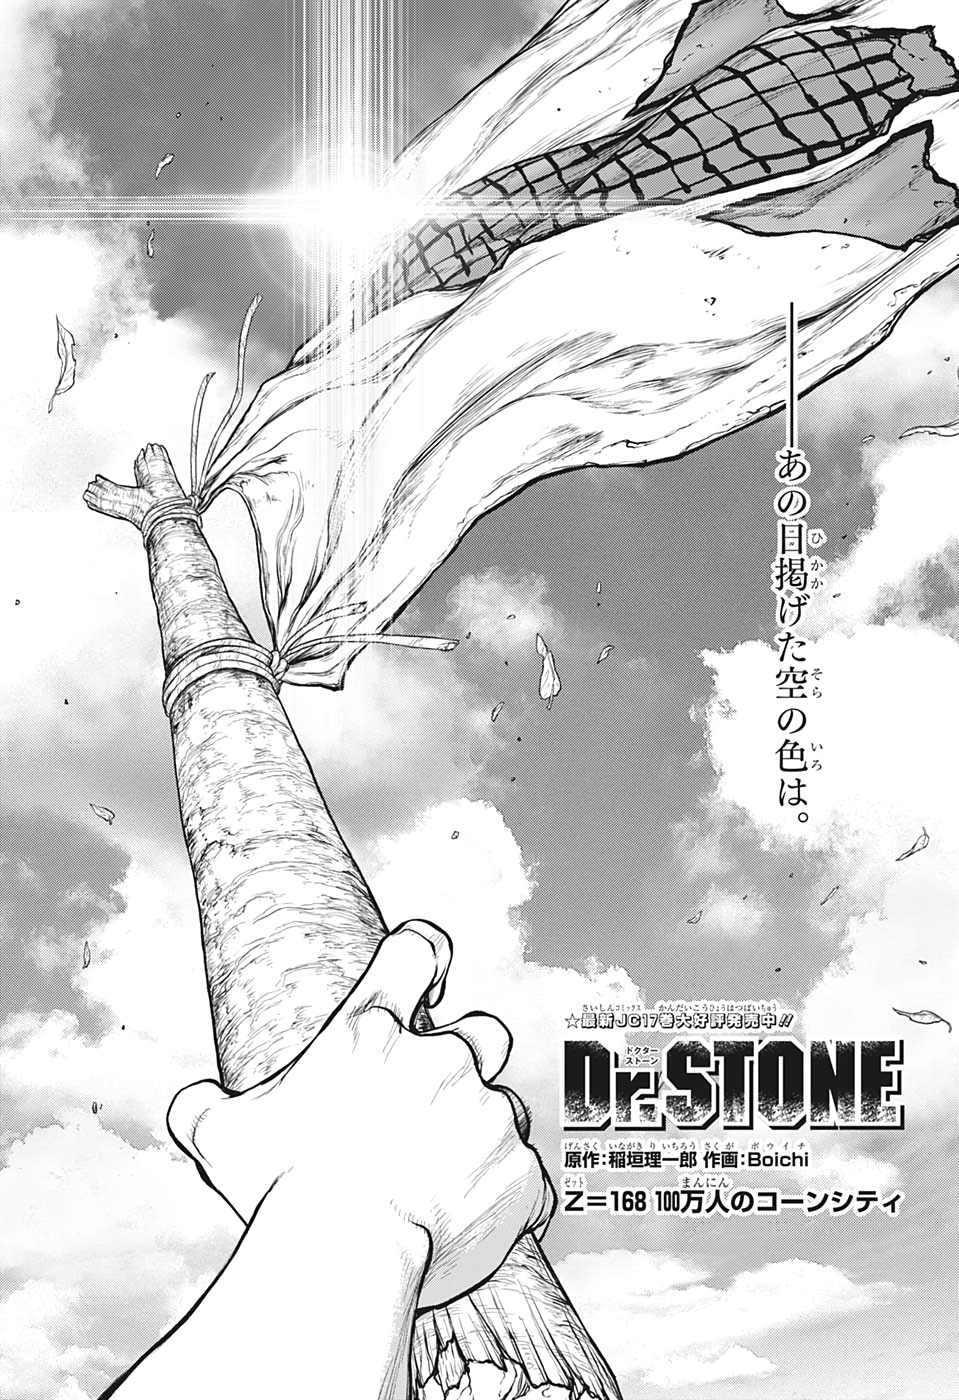 The next Dr. Stone episodes will be even bigger says team as